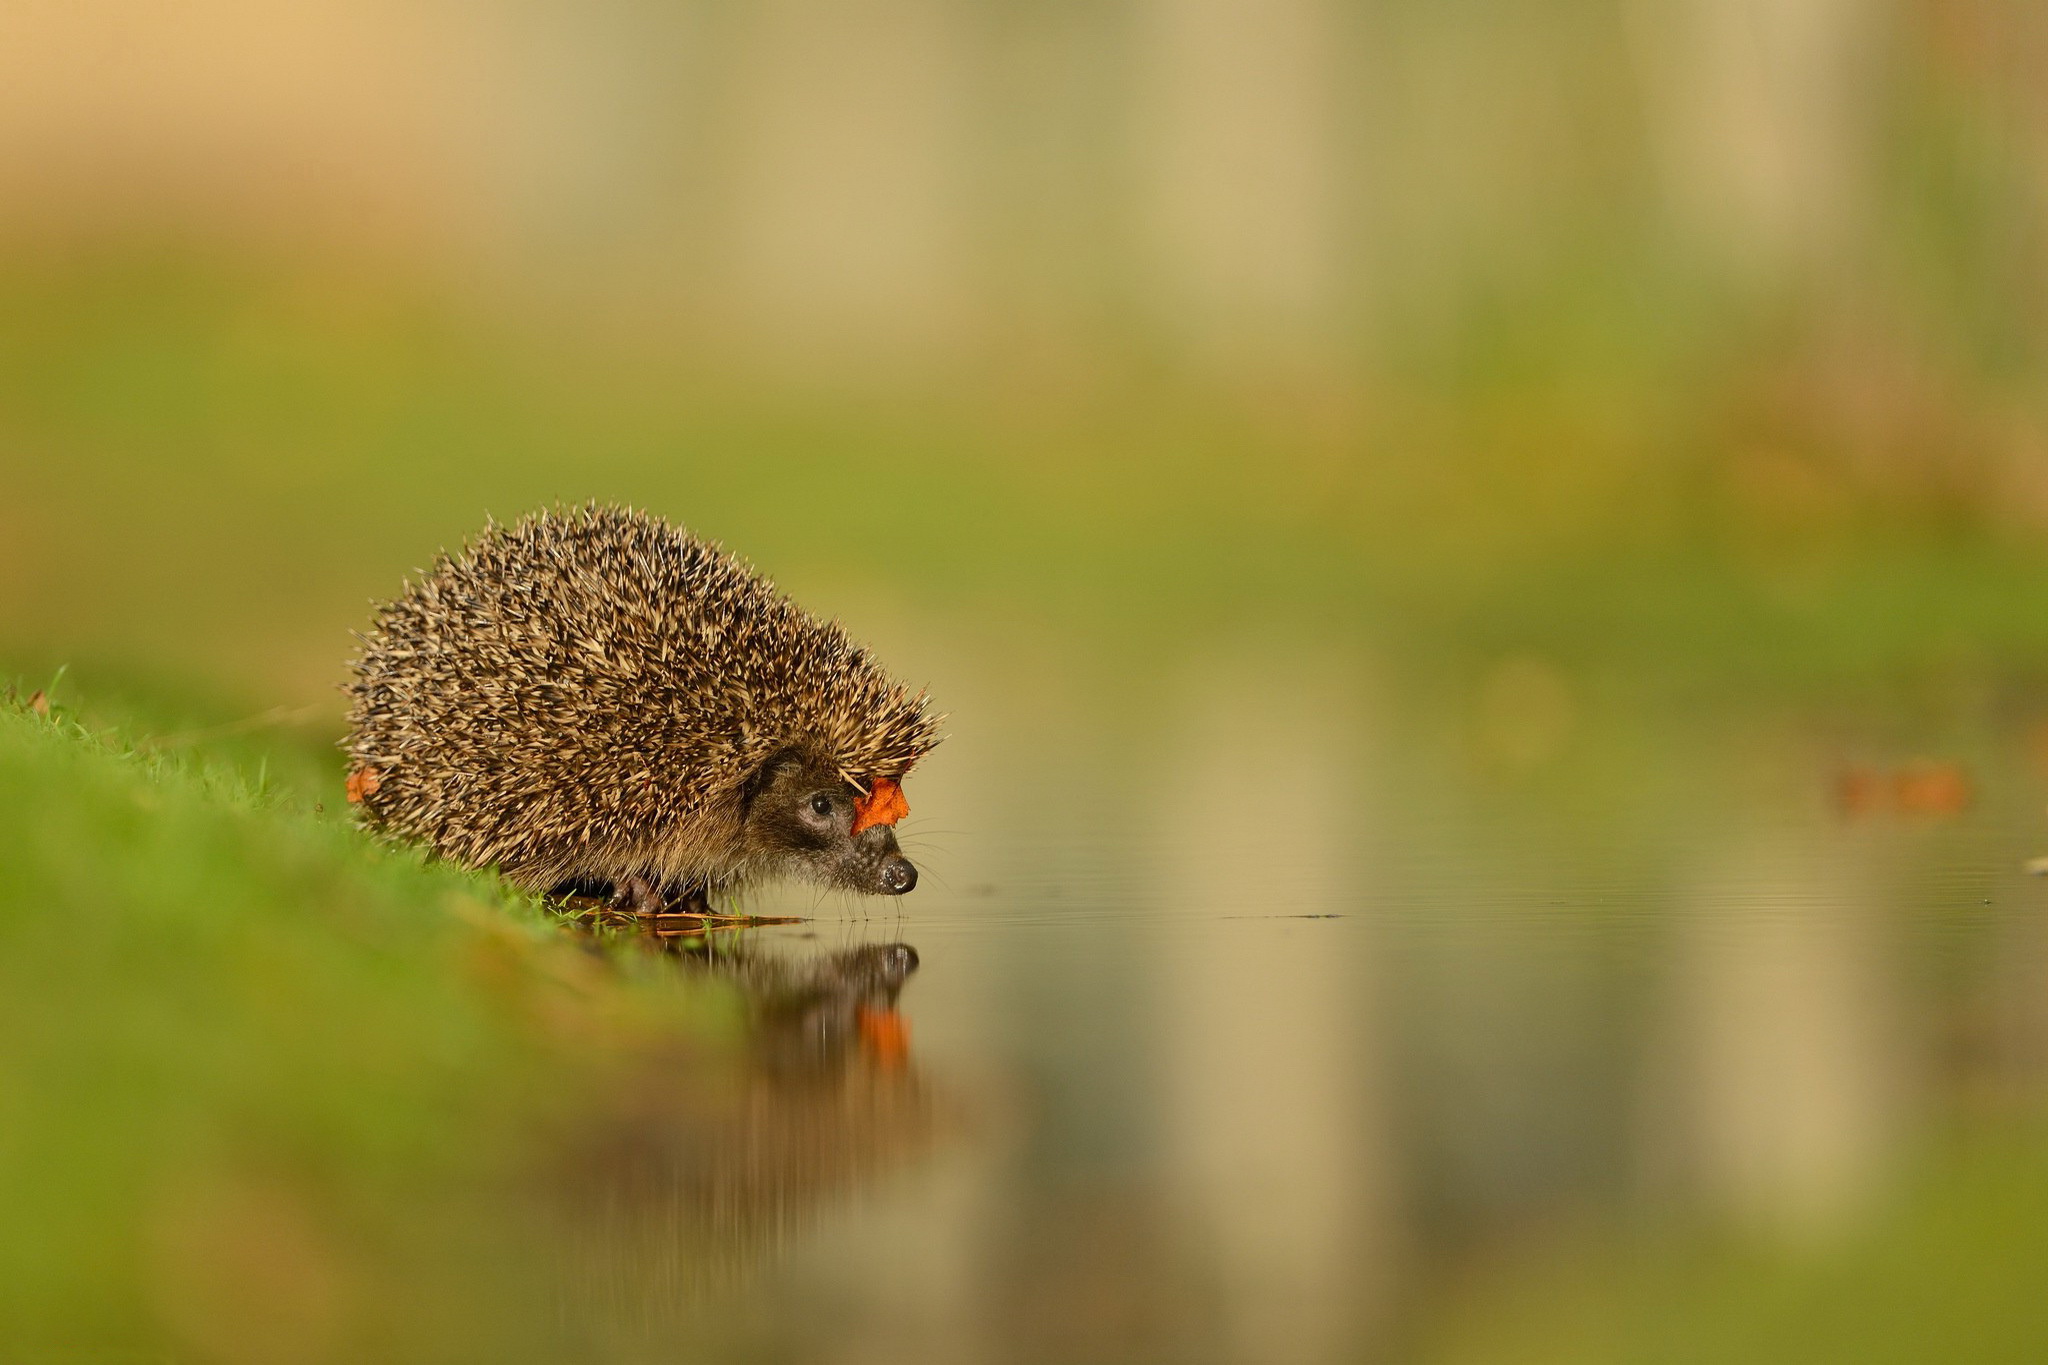 Hedgehog at the water